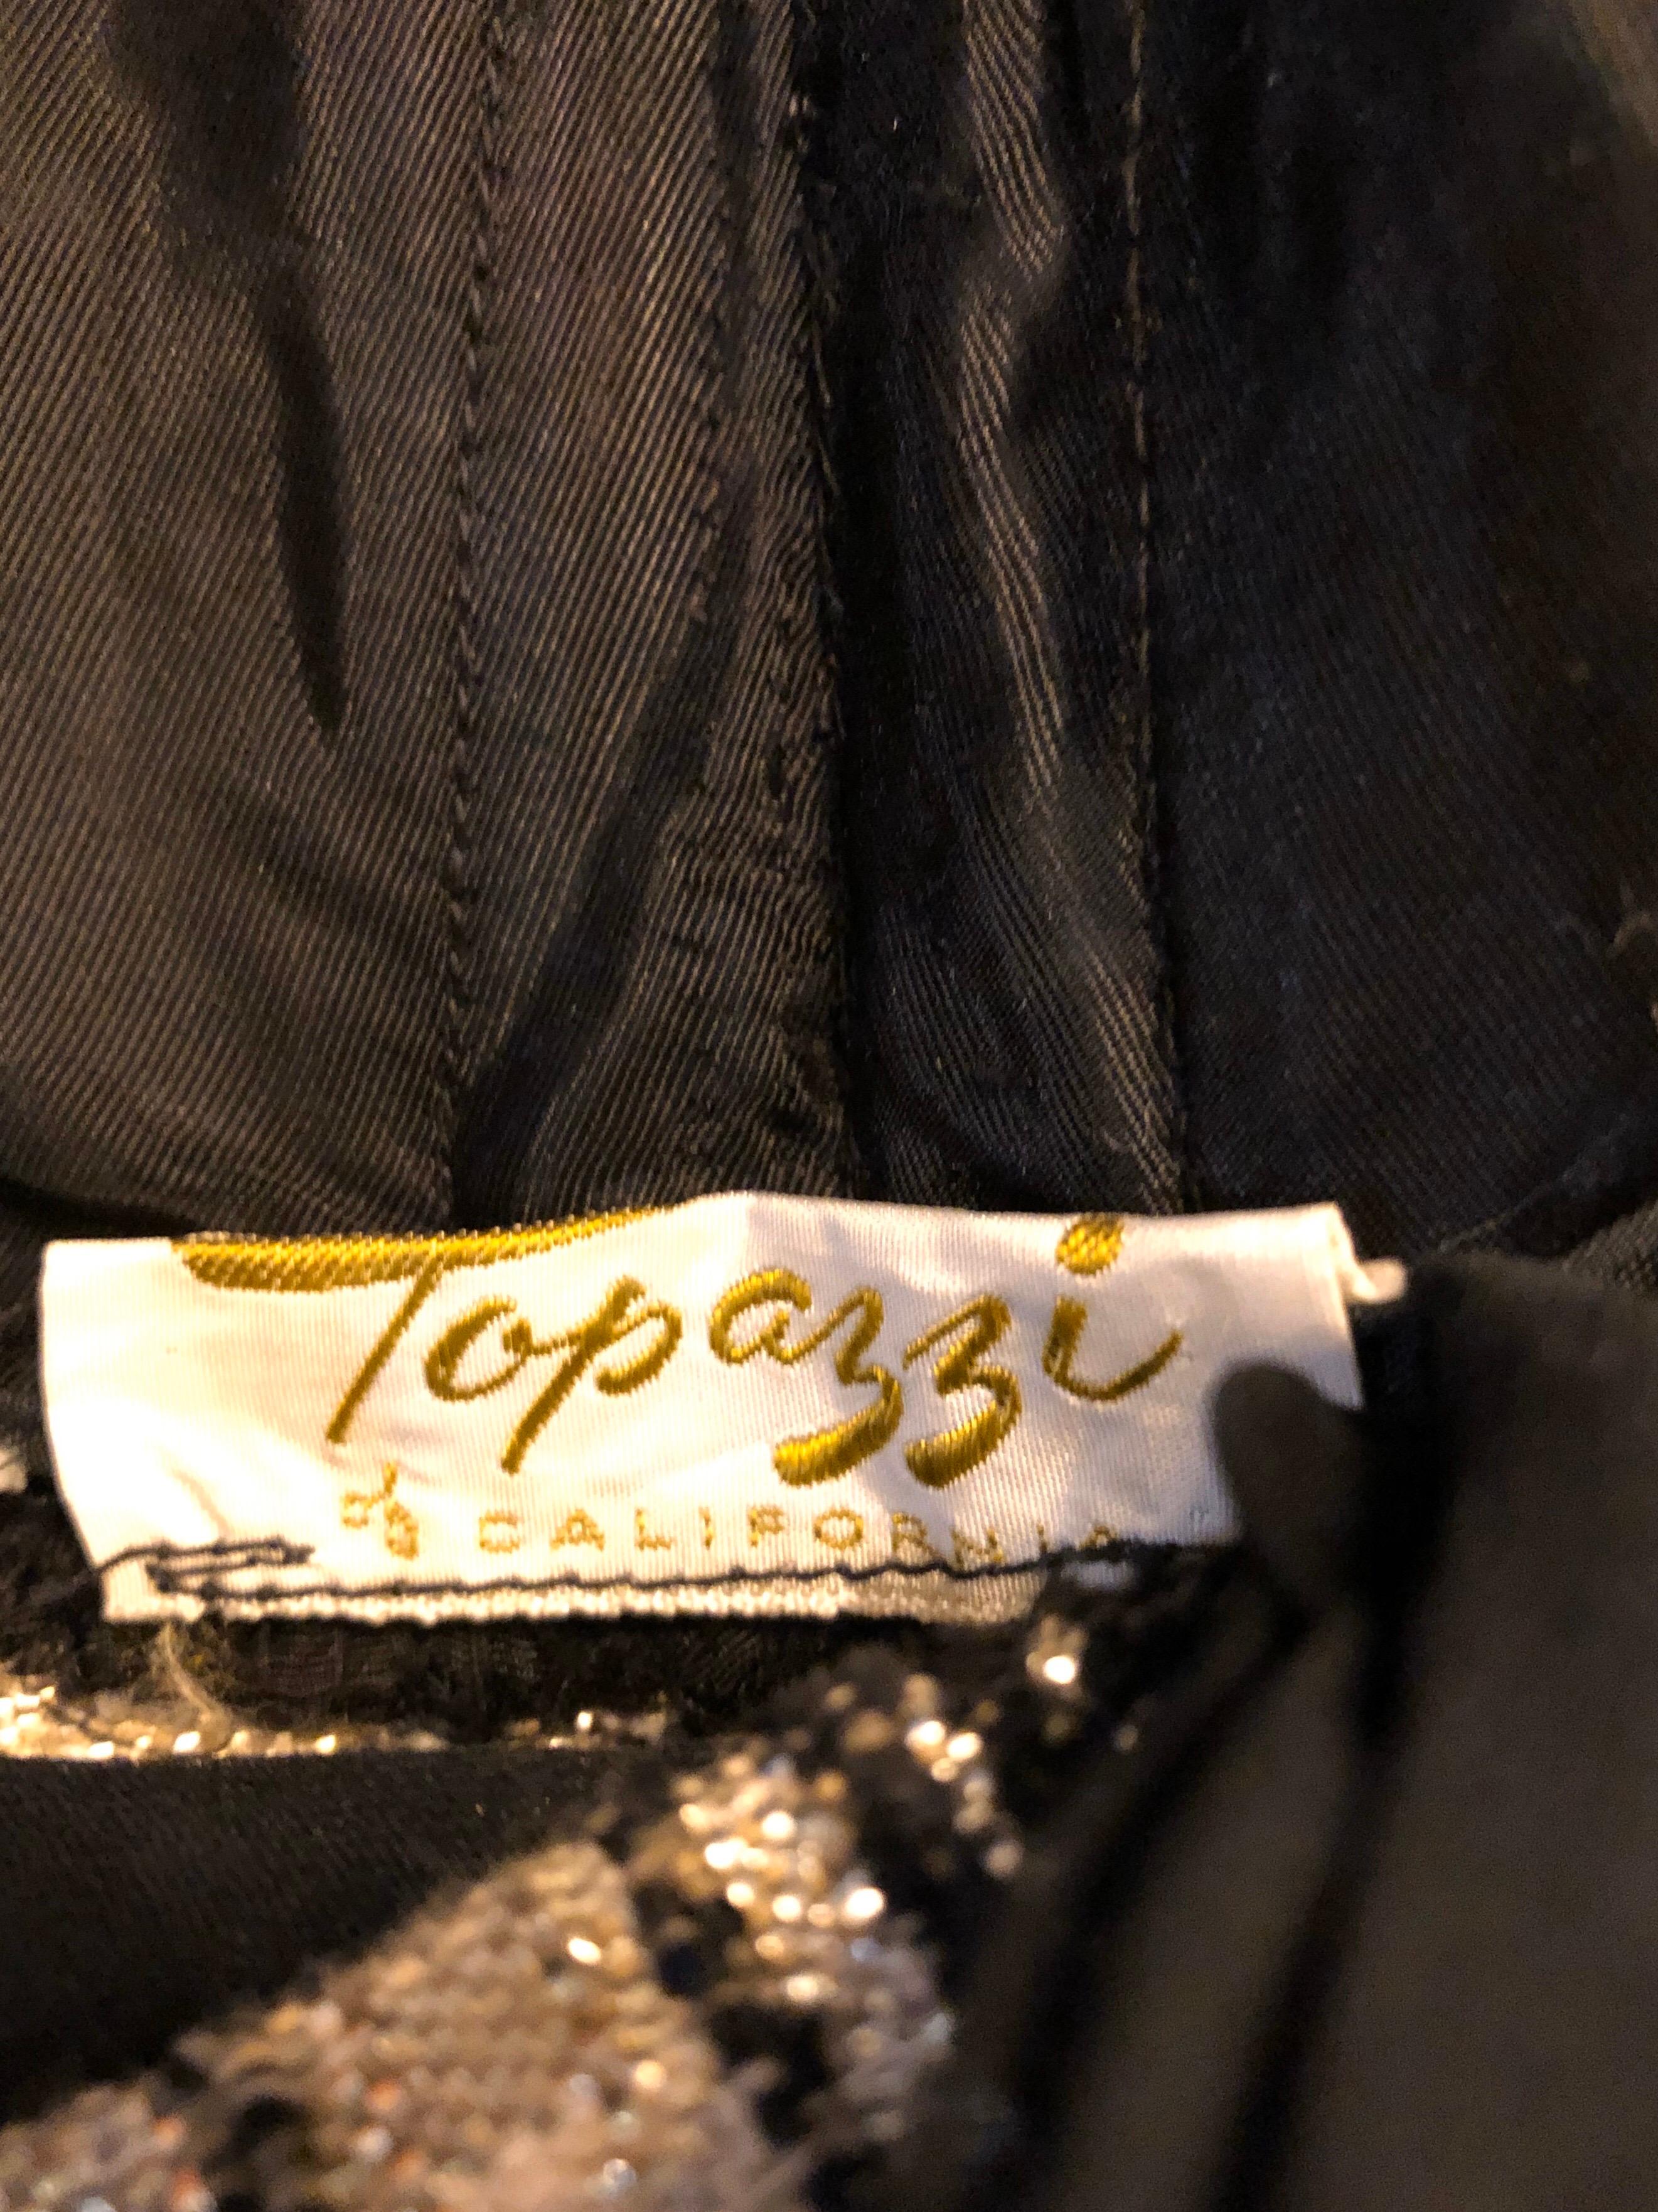 Rare mid 1950s TOPAZZI OF CALIFORNIA gold and black metallic one piece halter jumpsuit! Features flattering gold and black stripes throughout. Black silk chiffon straps criss cross in the back. Full metal zipper up the back with hook-and-eye